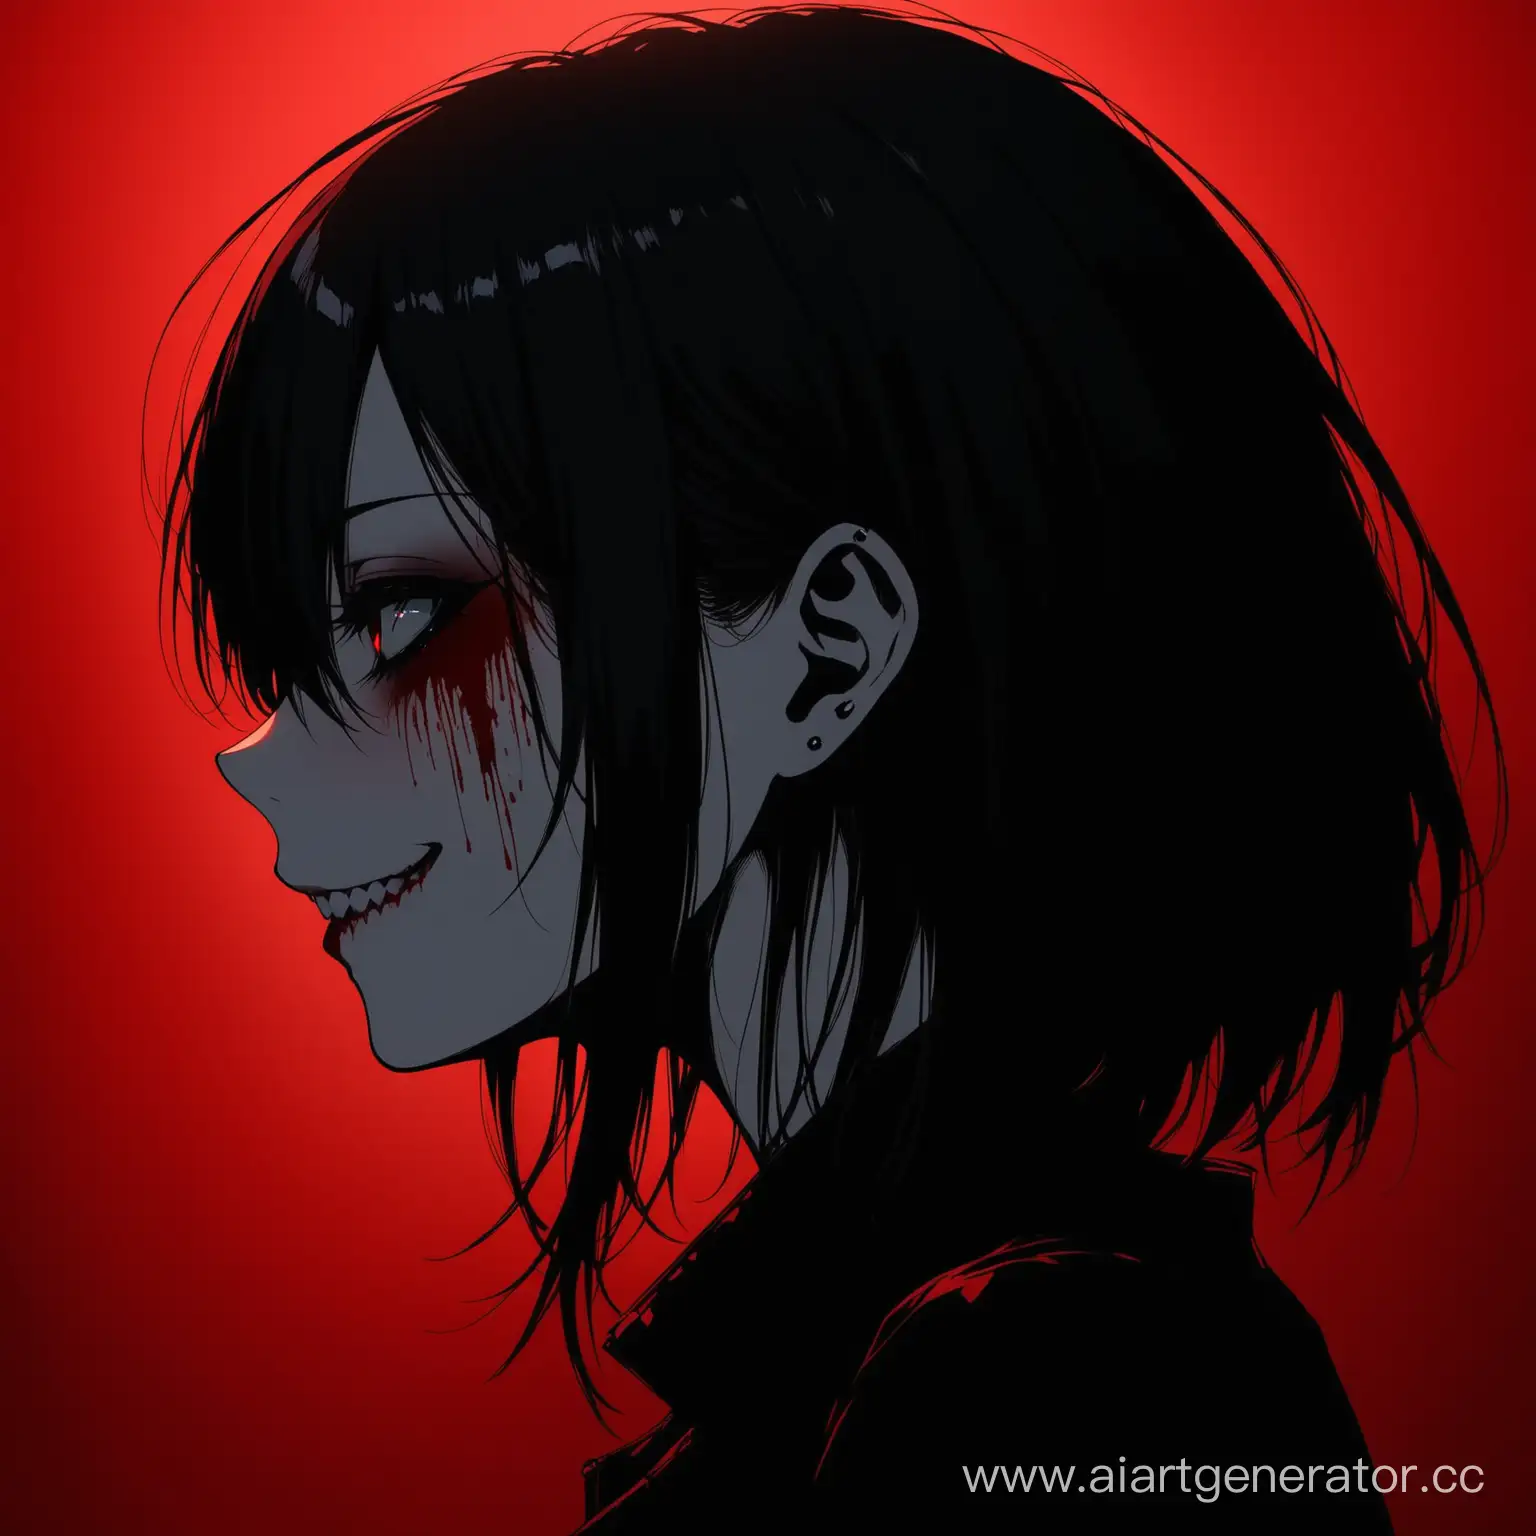 Mysterious-Anime-Emo-Girl-Profile-Portrait-with-Blood-and-Psycho-Smile-on-Red-Background